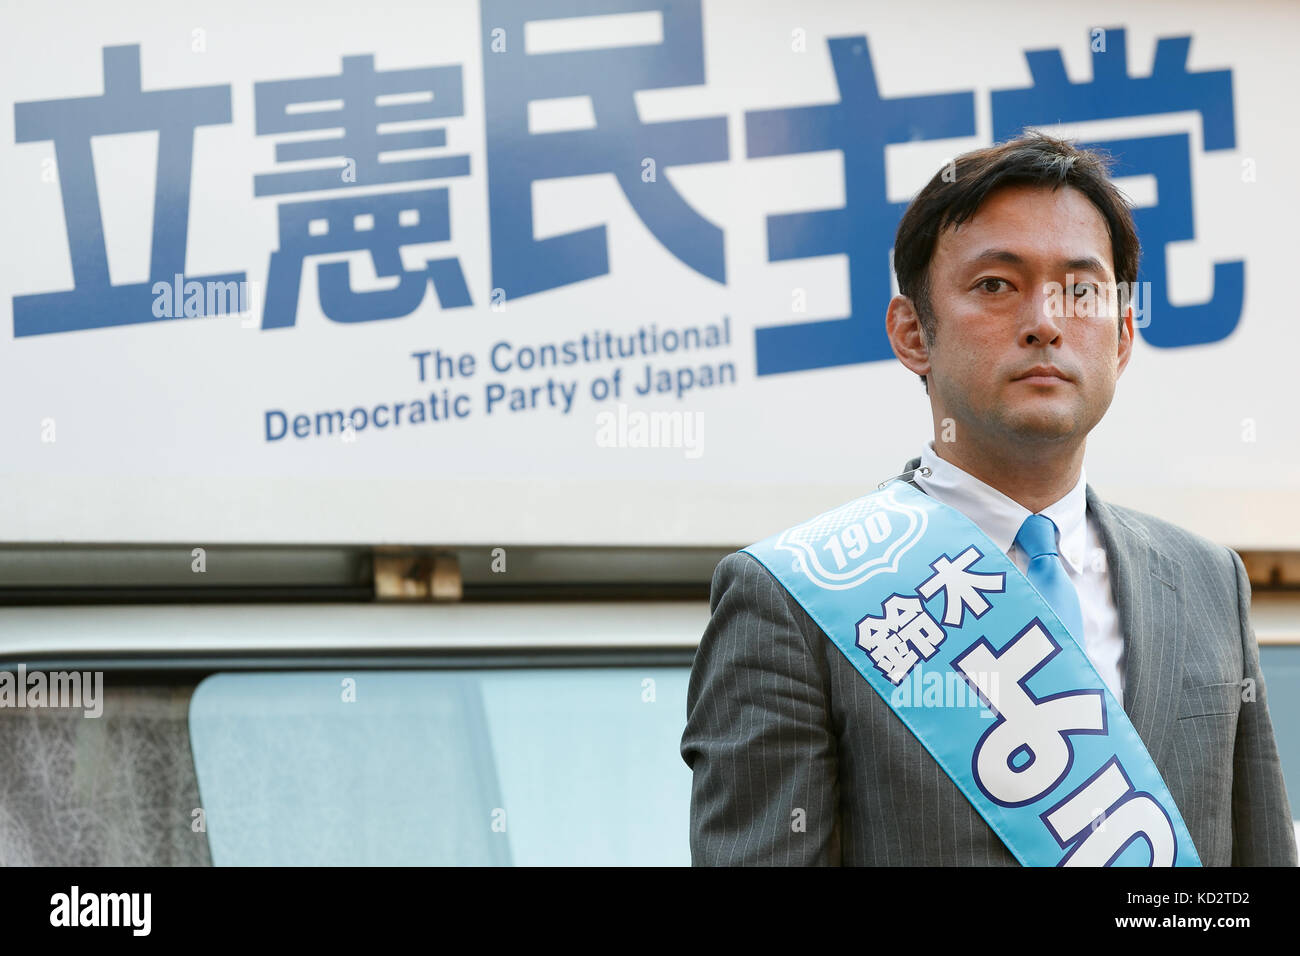 Tokyo, Japan. 10th Oct, 2017. Yosuke Suzuki, candidate of the Constitutional Democratic Party of Japan, attends a campaign event outside Ikebukuro Station on October 10, 2017, Tokyo, Japan. Yukio Edano, head of the newly created Constitutional Democratic Party (CDP) attended a campaign event to support his party's candidate Yosuke Suzuki. Campaigning officially started on October 10 for the October 22 election. Credit: Rodrigo Reyes Marin/AFLO/Alamy Live News Stock Photo